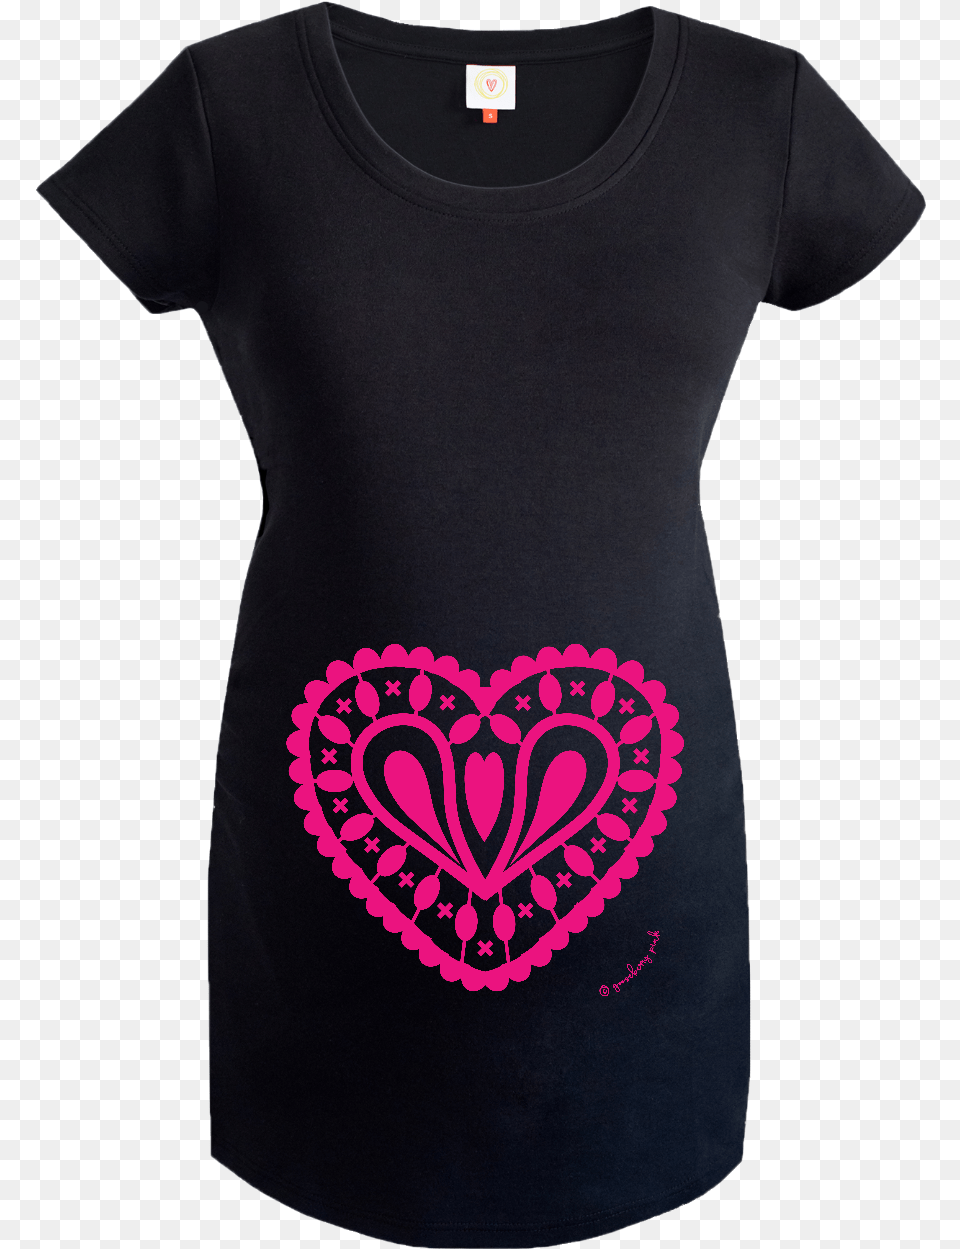 Gooseberry Pink Hot Pink Heart Maternity Top In Black Background Materinity Clothes, Clothing, T-shirt, Shirt, Pattern Png